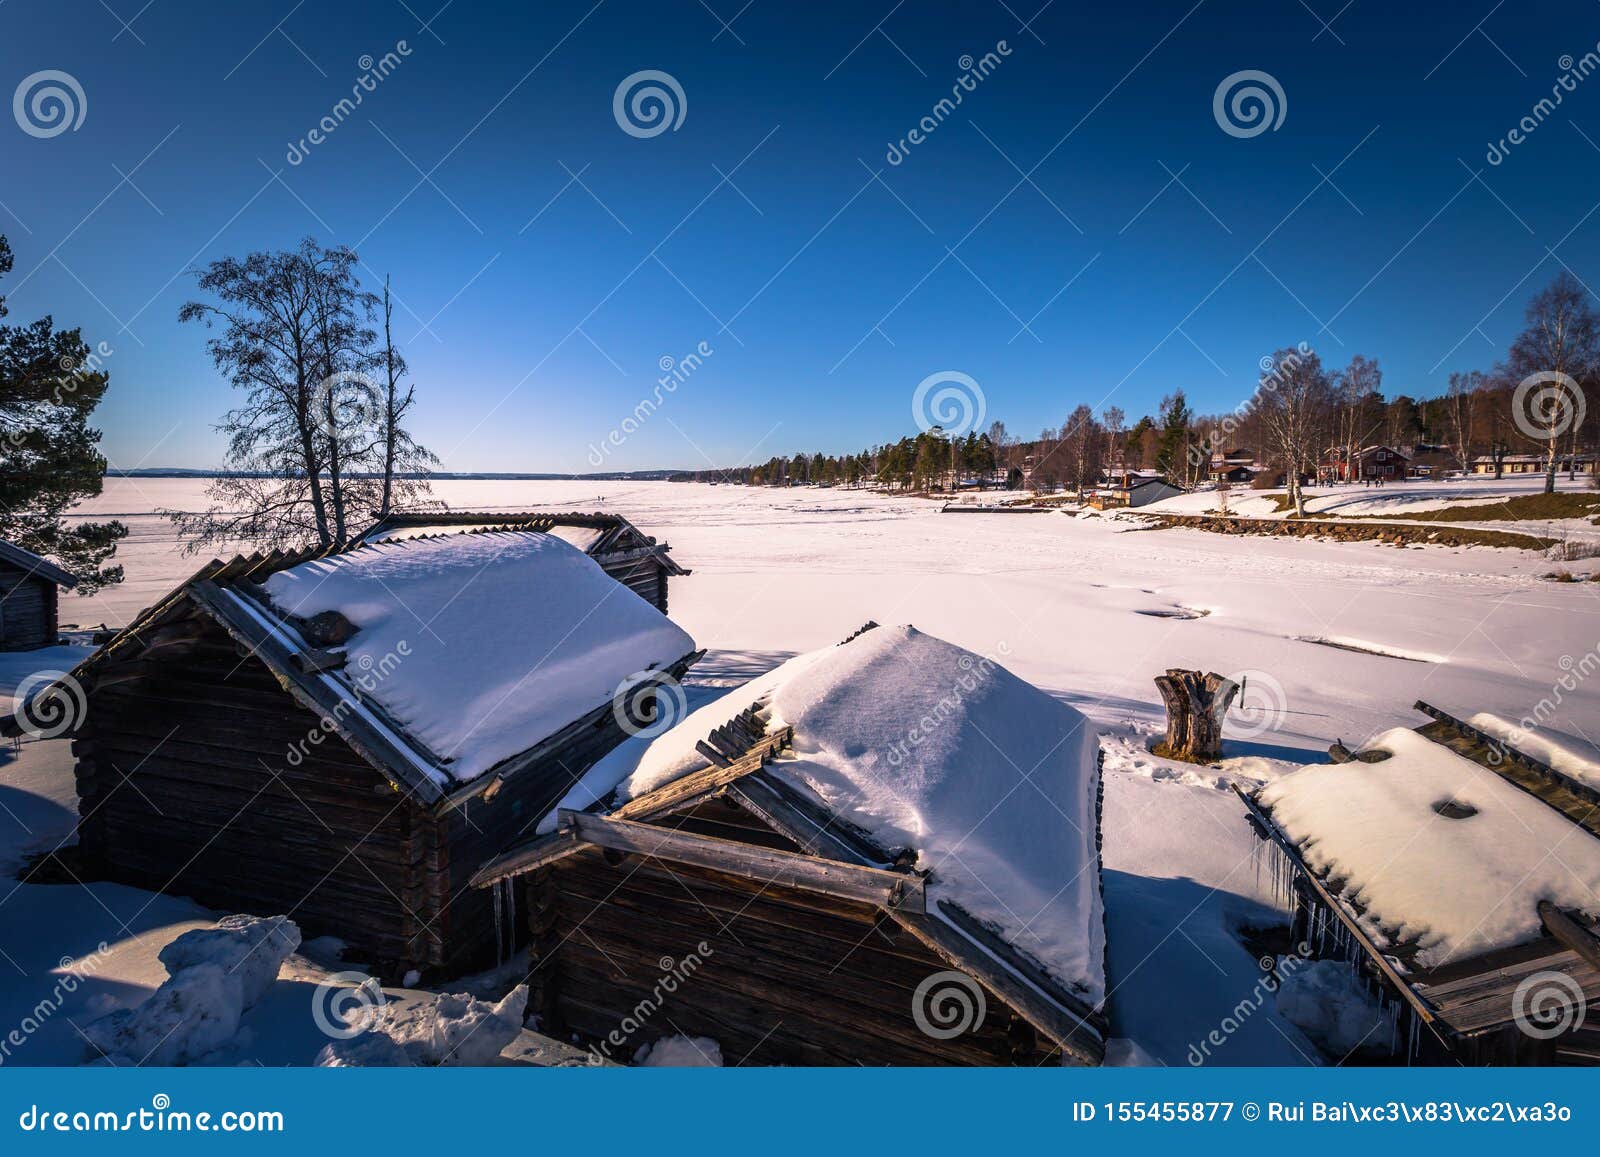 rattvik - march 30, 2018: wooden houses by the frozen lake siljan in rattvik, dalarna, sweden